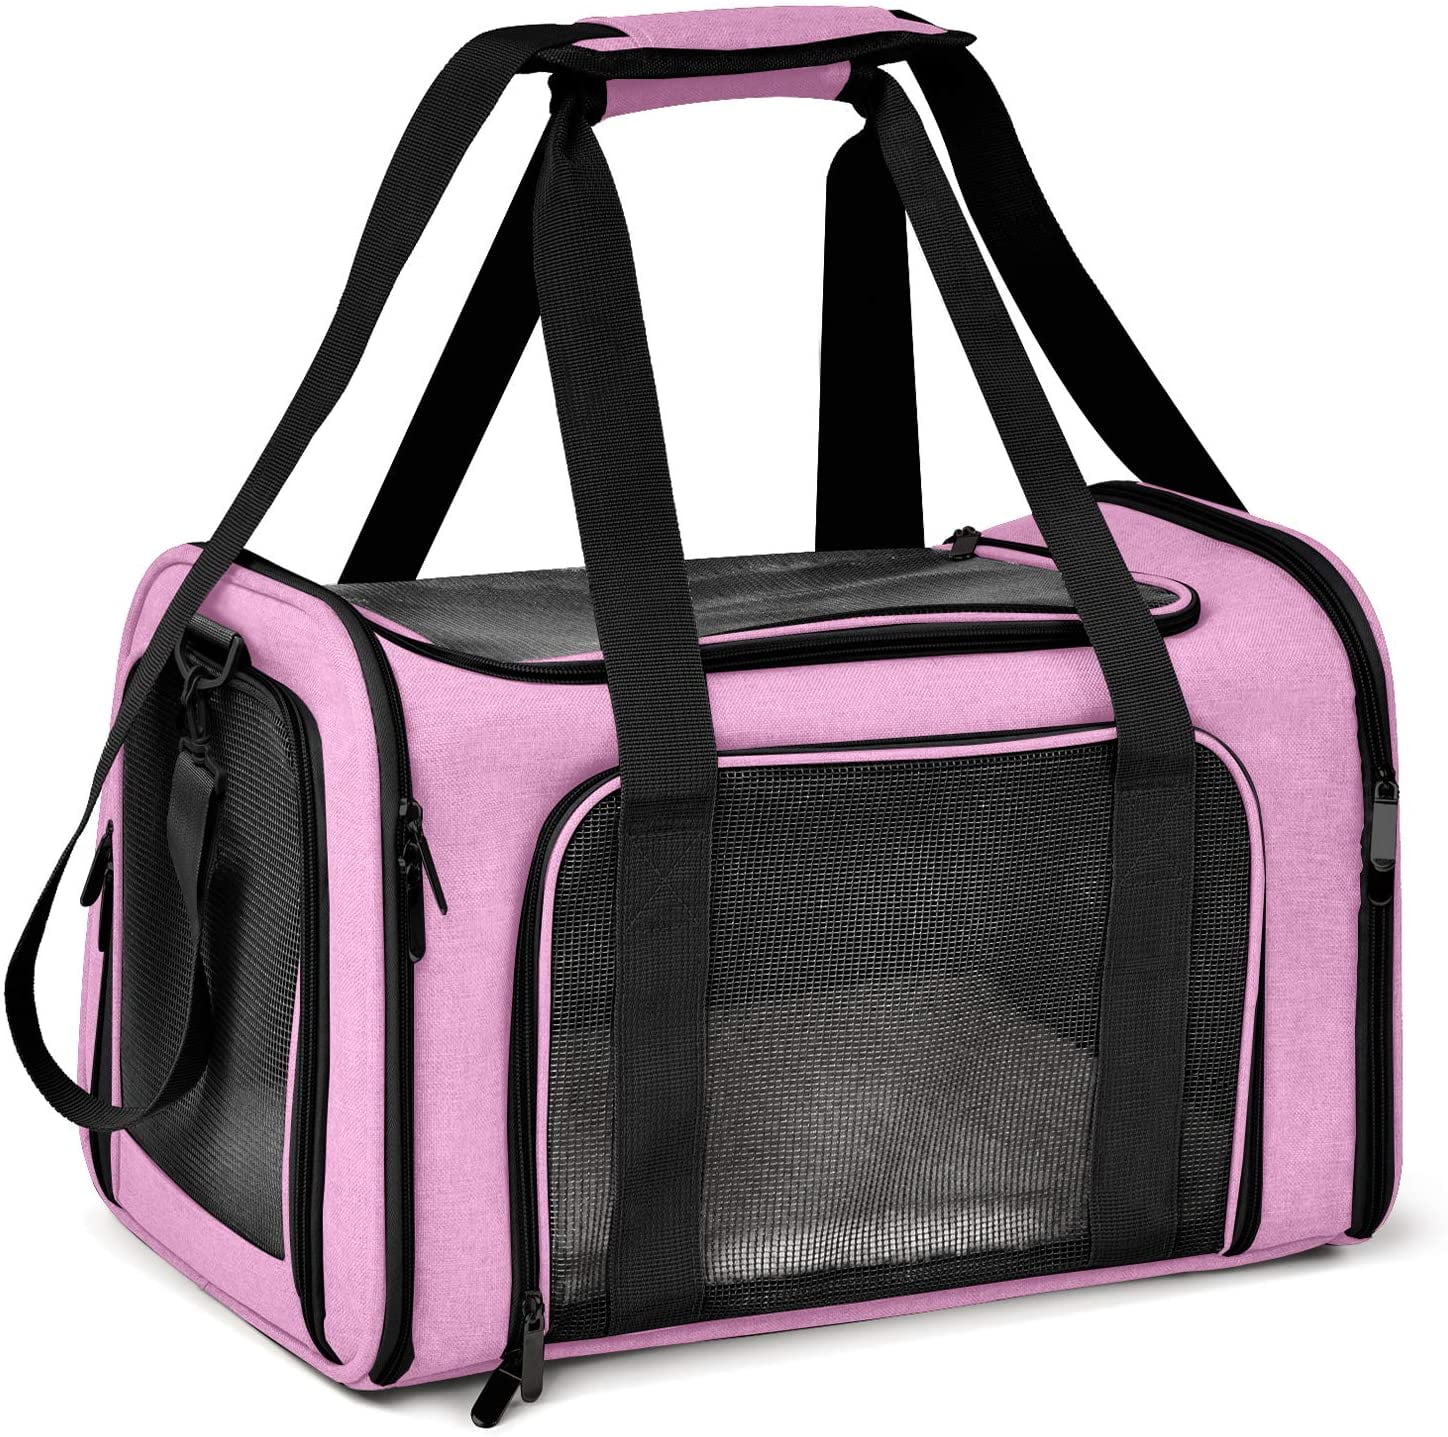 Medium, Pink ZaneSun Cat Carrier Dog Carrier Pet Carrier for Small Medium Cats Dogs Puppies of 15 Lbs,Airline Approved Dog Cat Travel Carrier 